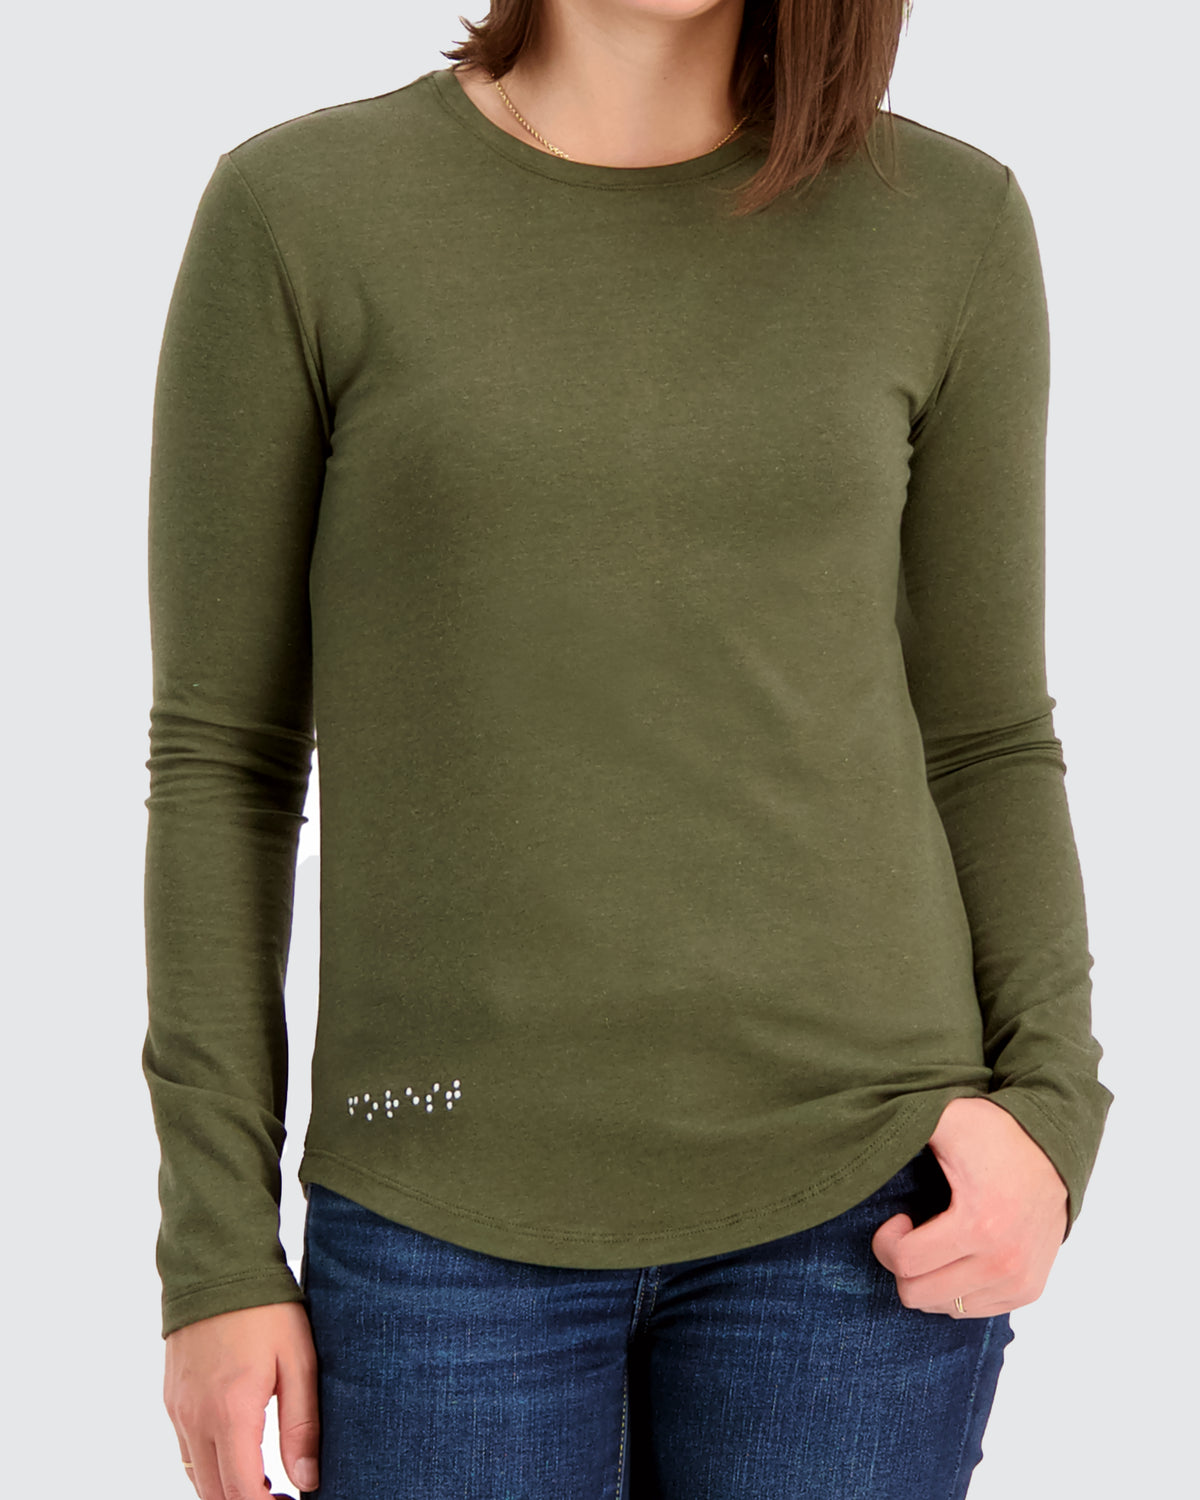 Two Blind Brothers - Womens Women's LS Crewneck Forest